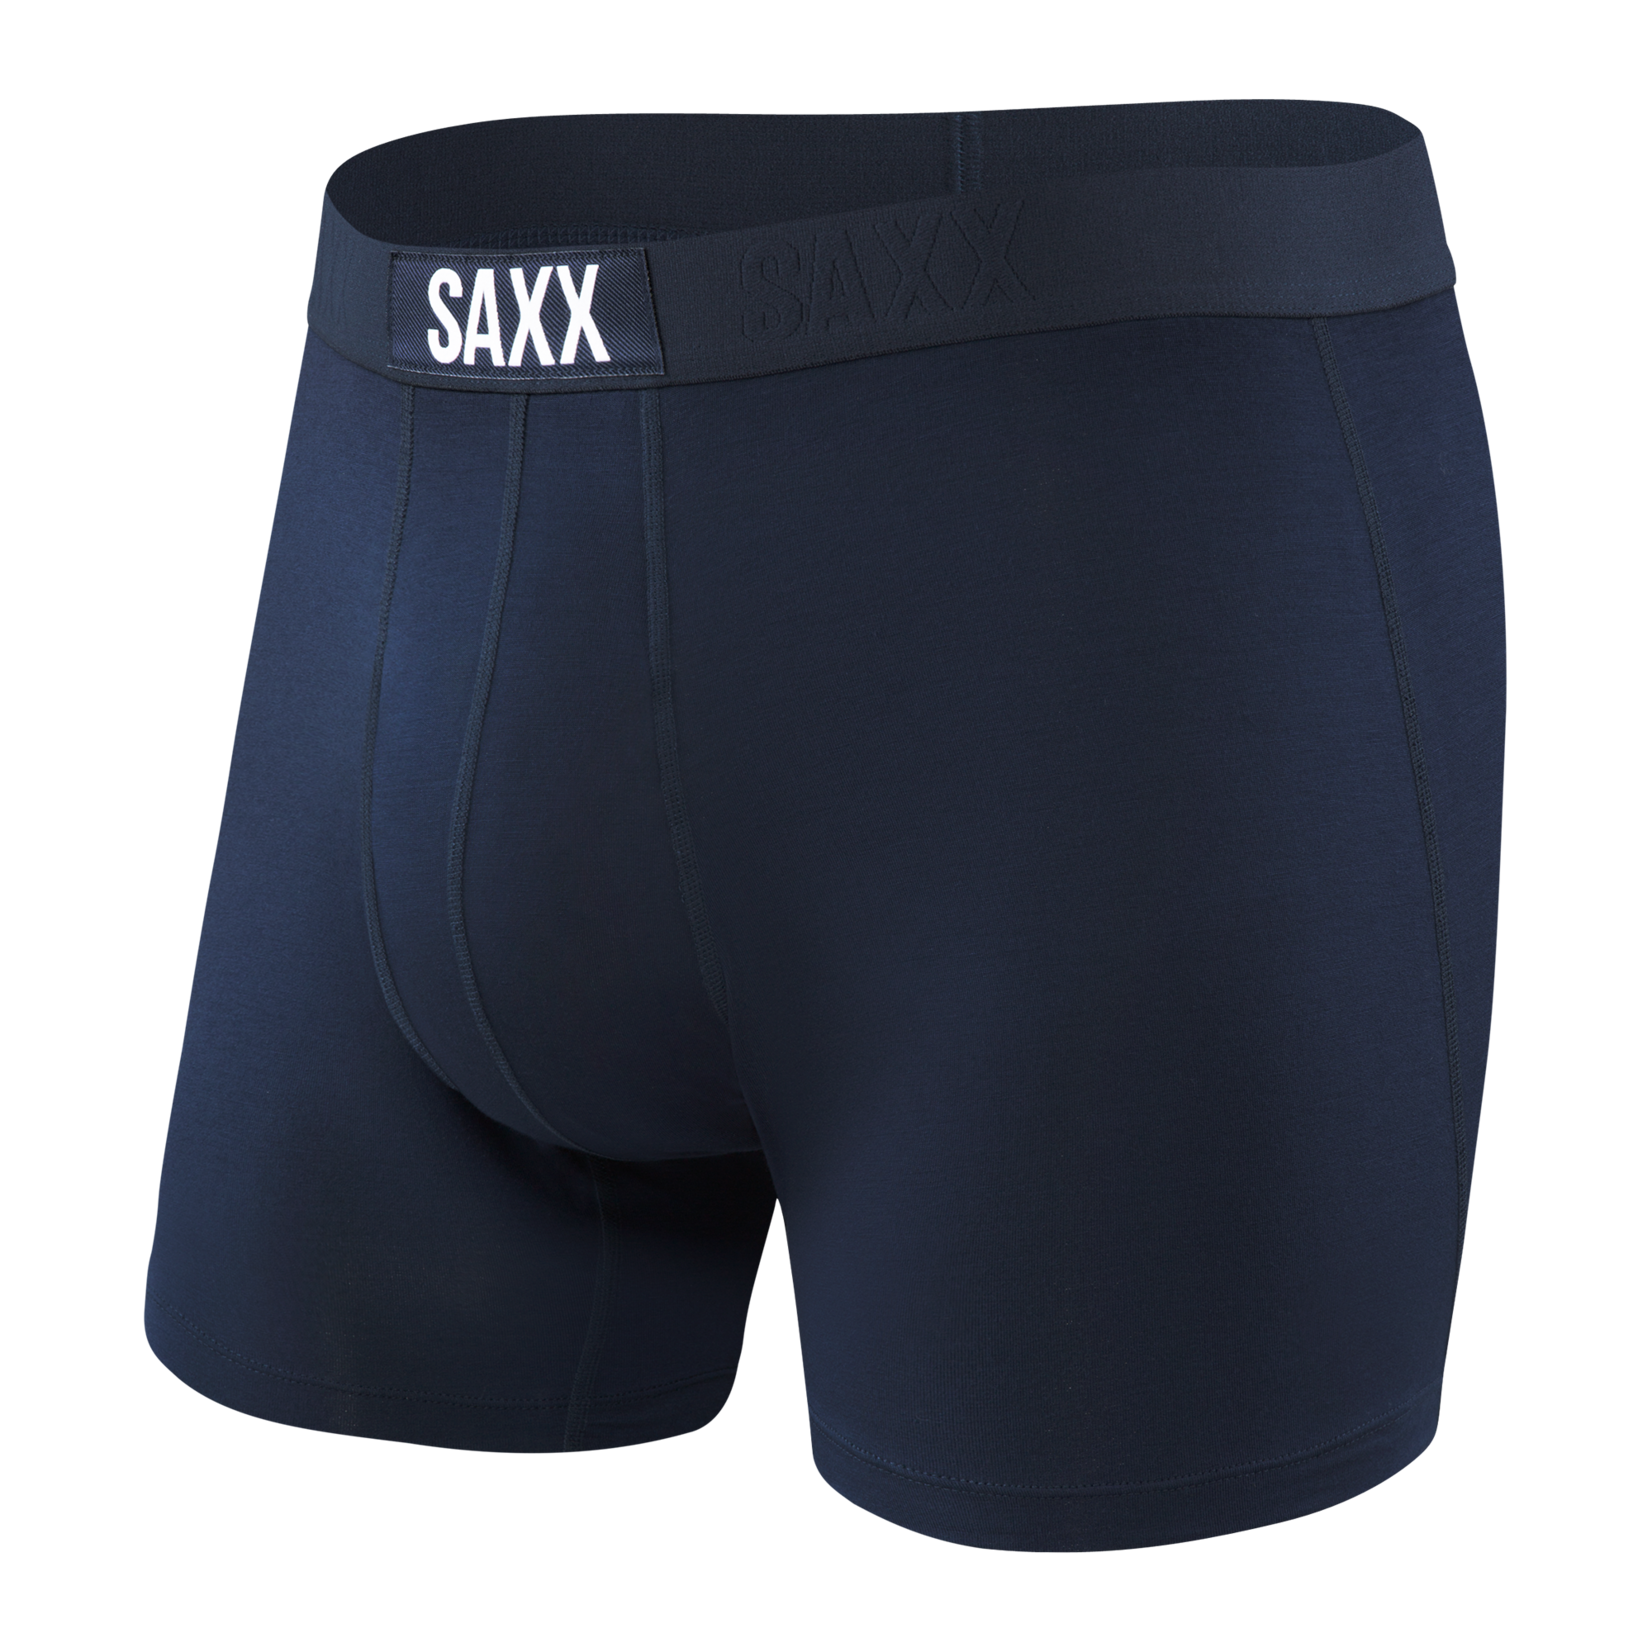 SAXX SAXX 's "Black / Navy" Two Pack Vibe Boxer Brief